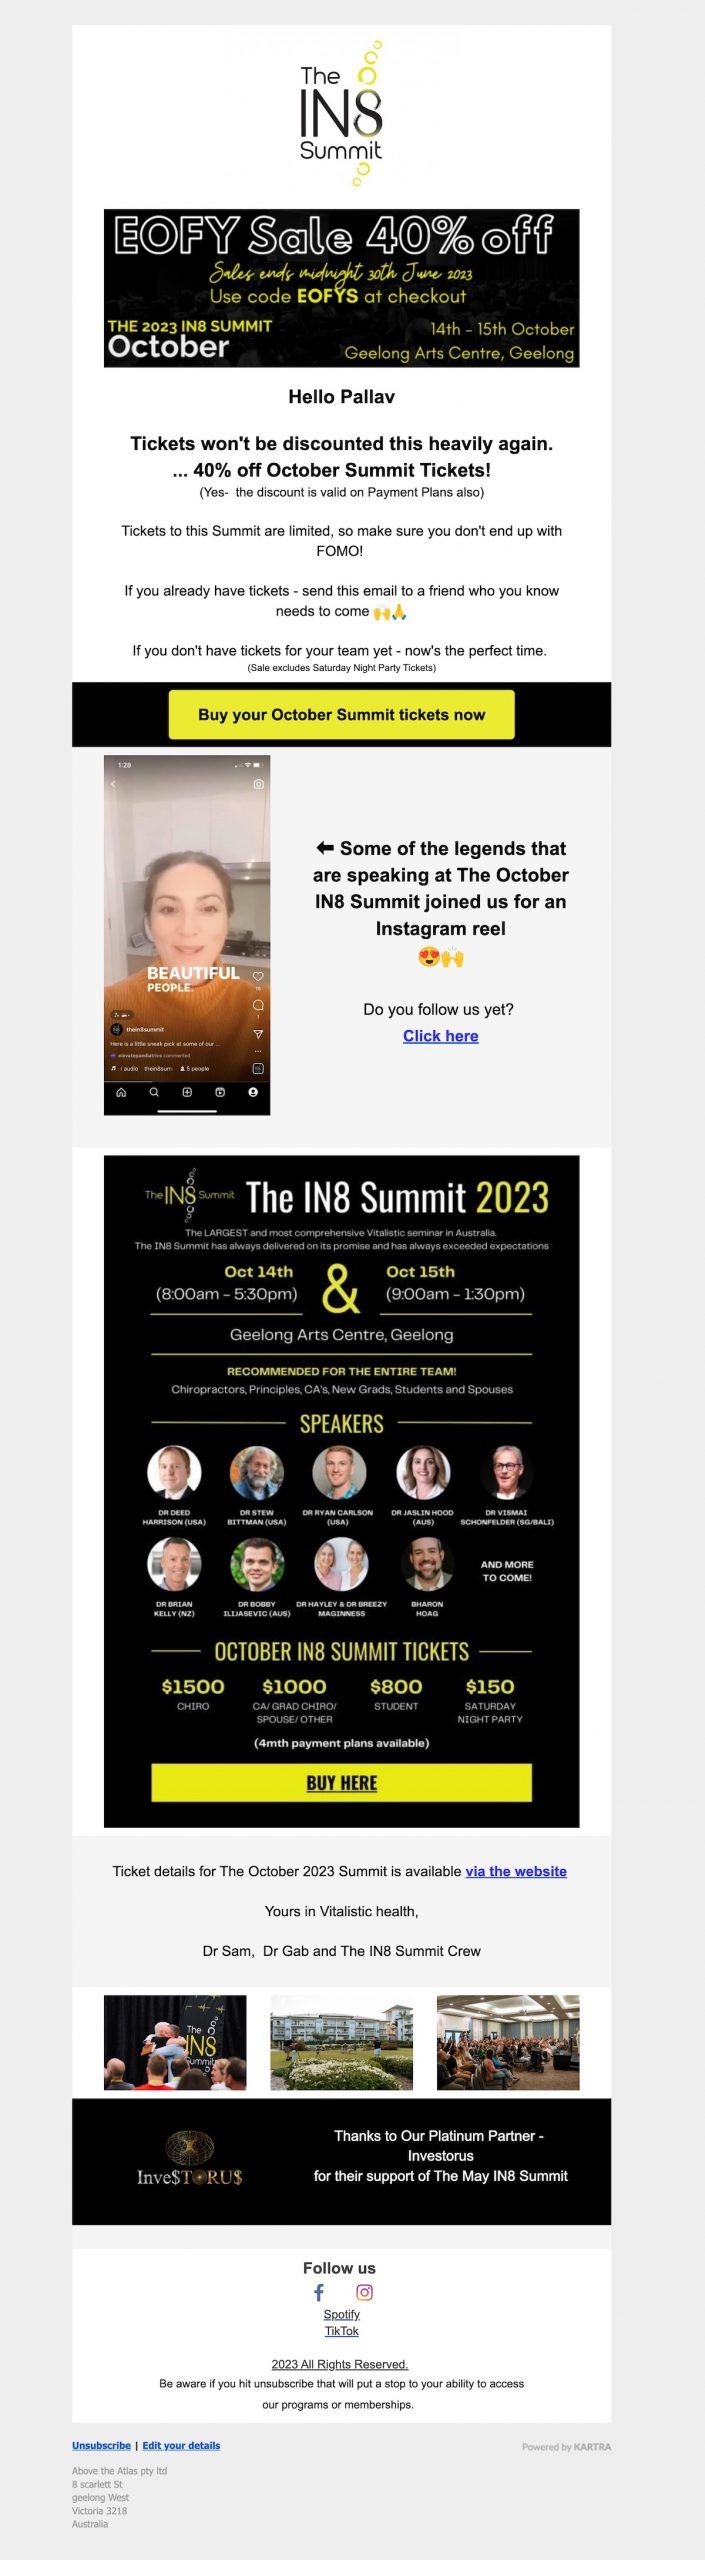 Sample invitation email to attend a summit